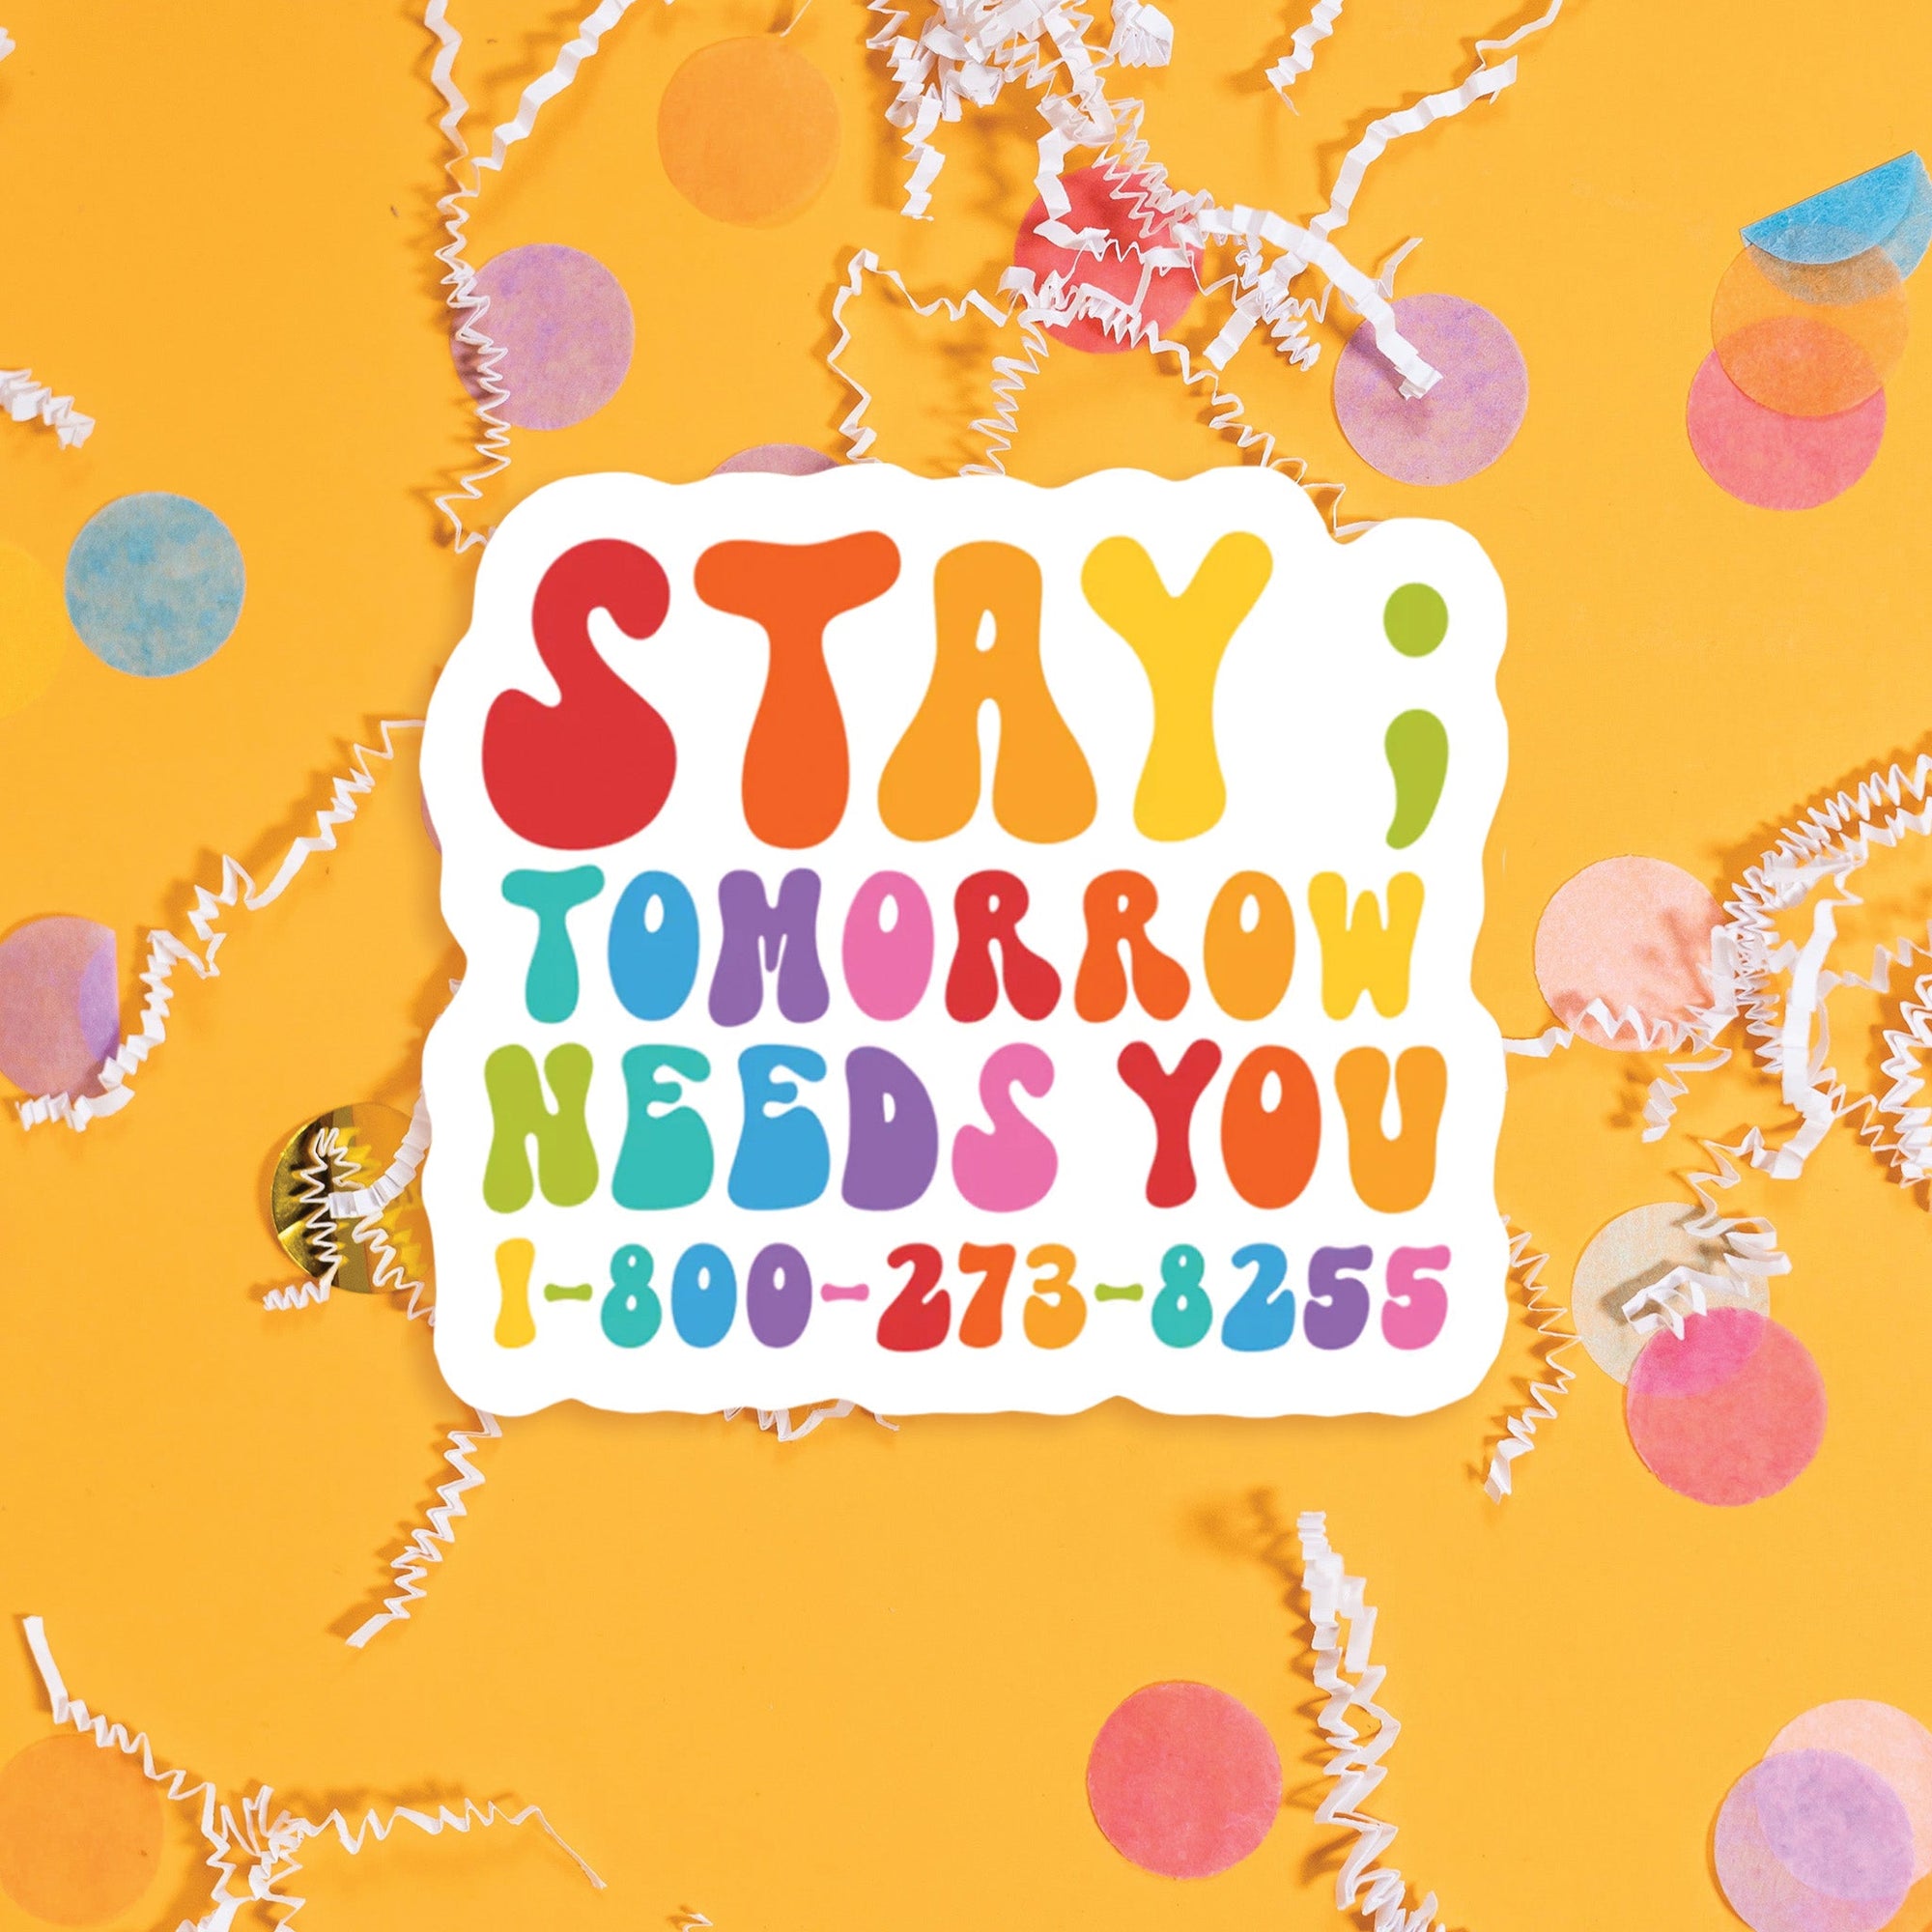 On a sunny mustard background sits a sticker with colorful confetti and white crinkle scattered around. This sticker has colorful lettering in red, dark coral, orange, sunny mustard, celery green, turquoise, blue, purple, and bubblegum pink. It says "STAY; TOMORROW NEEDS YOU 1-800-273-8255" in thick serif font. Approximately 3".